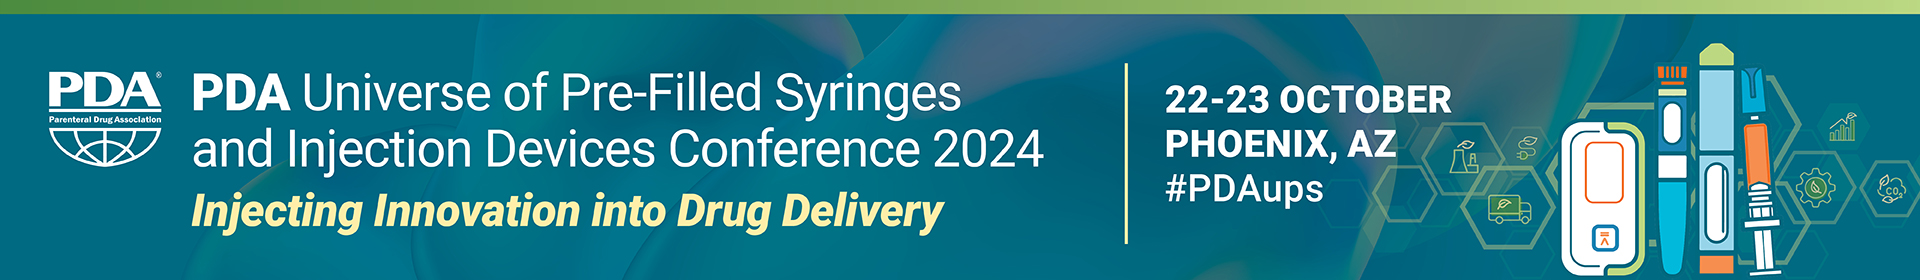 PDA Universe of Pre-Filled Syringes and Injection Devices Conference 2024 Event Banner